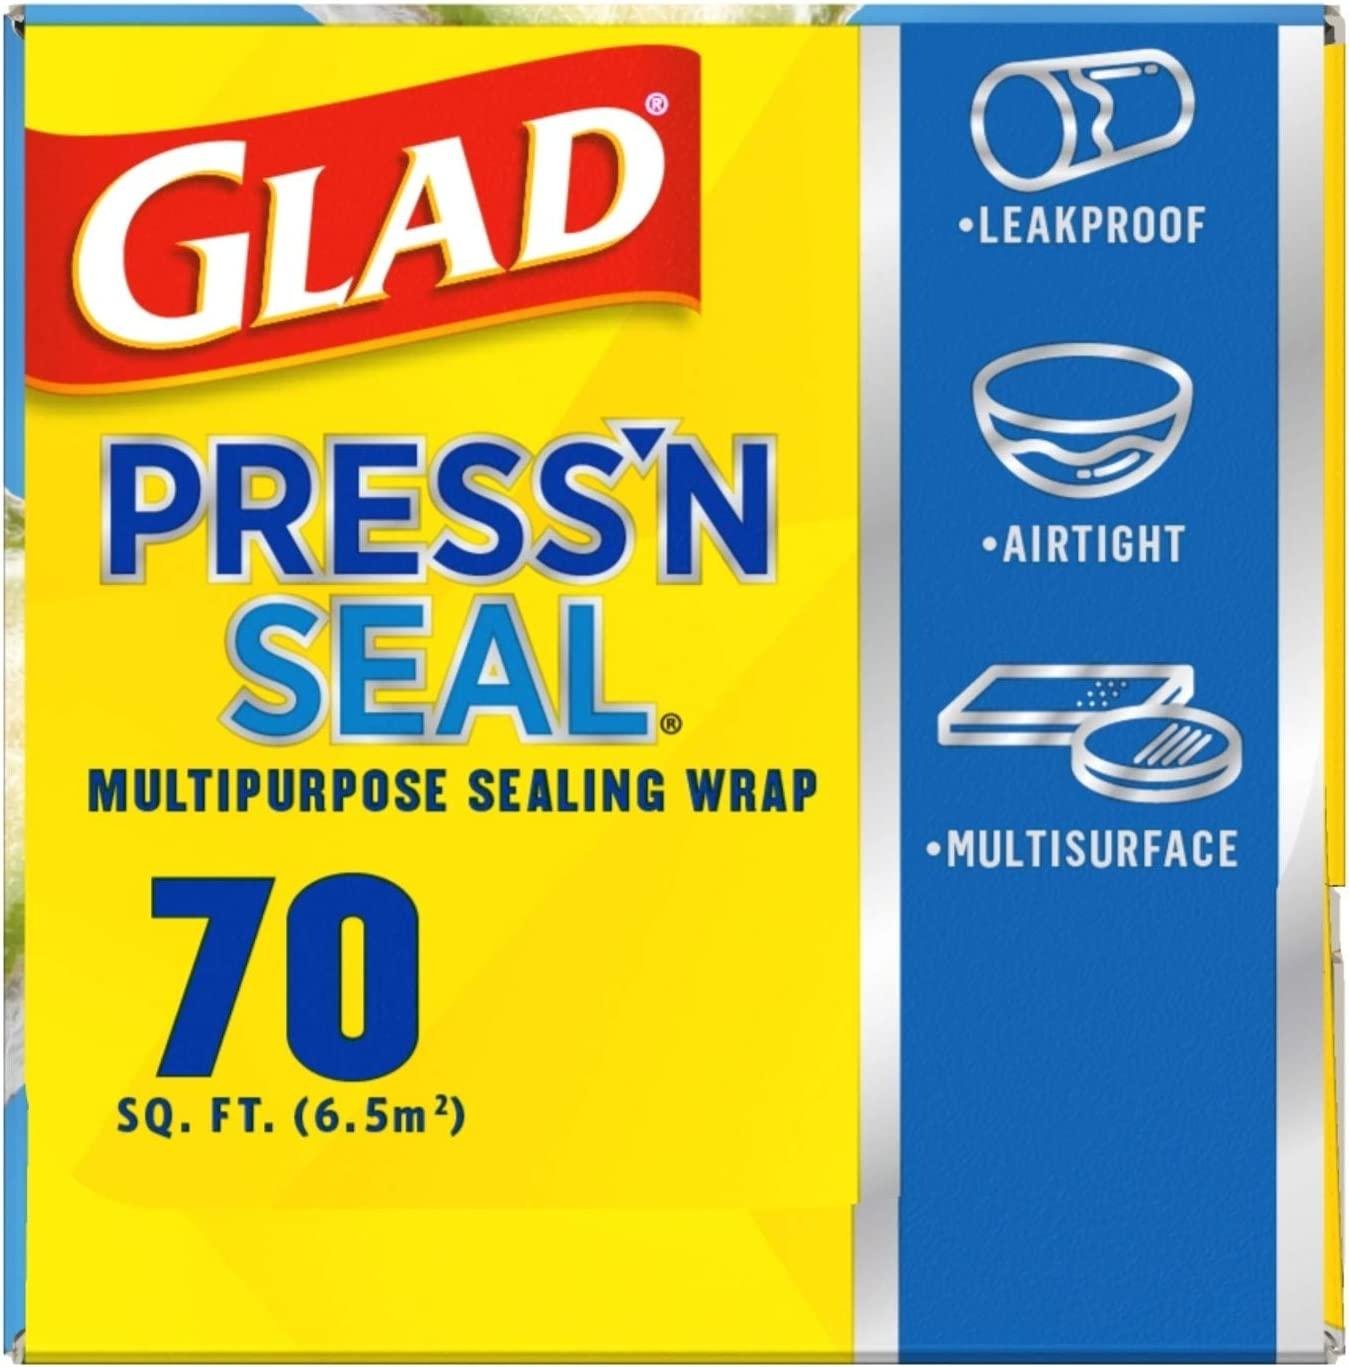 Glad Press'n Seal Plastic Food Wrap - 70 Square Foot Roll (Package May Vary)